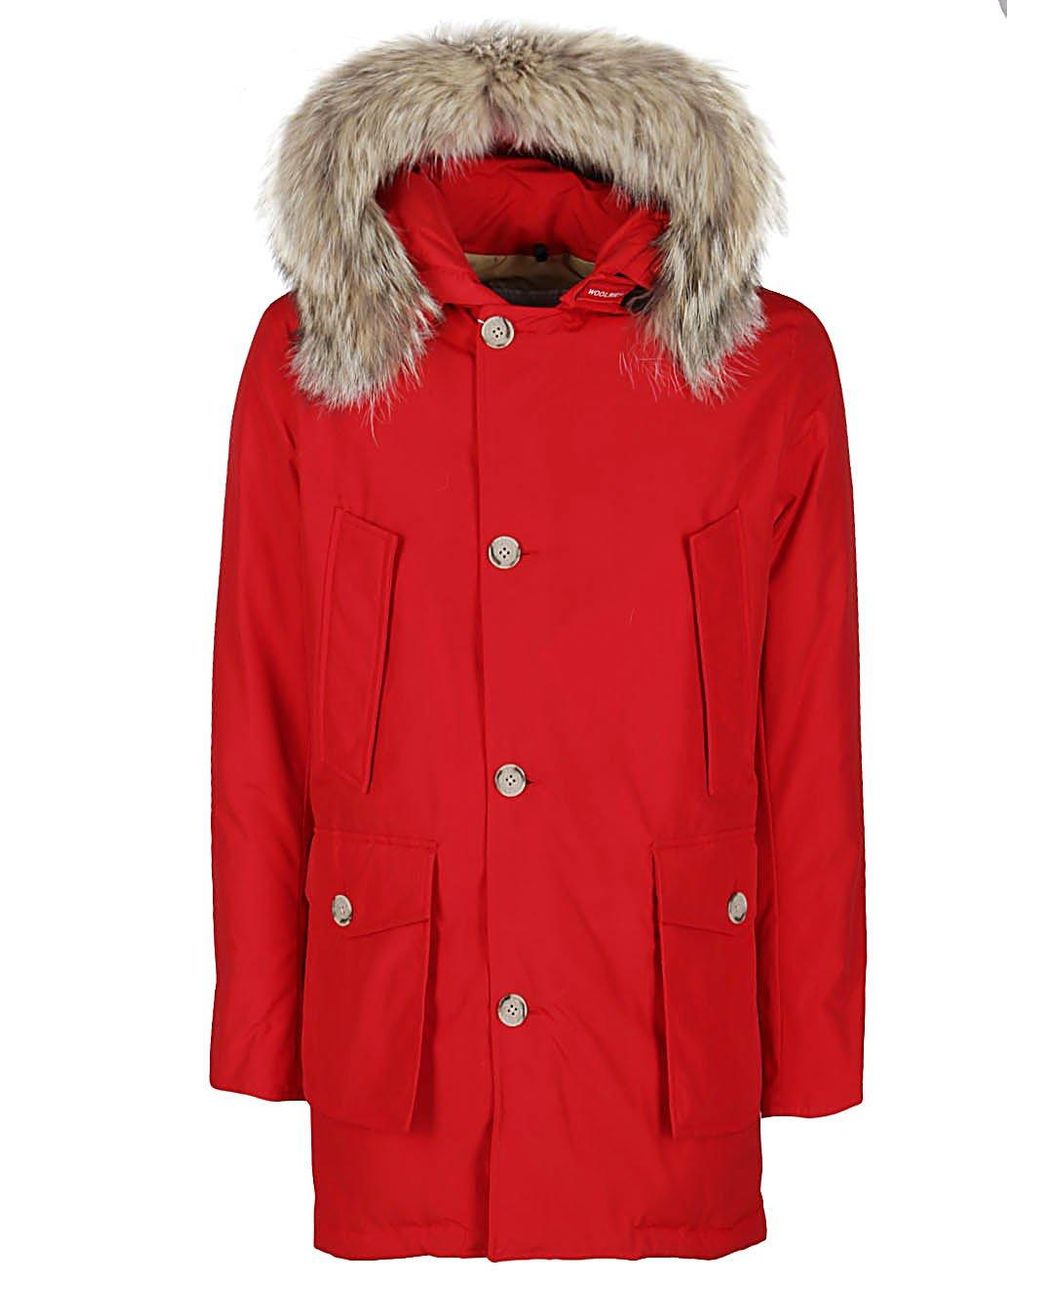 Woolrich Arctic Detachable Fur Hooded Parka in Red for Men - Lyst